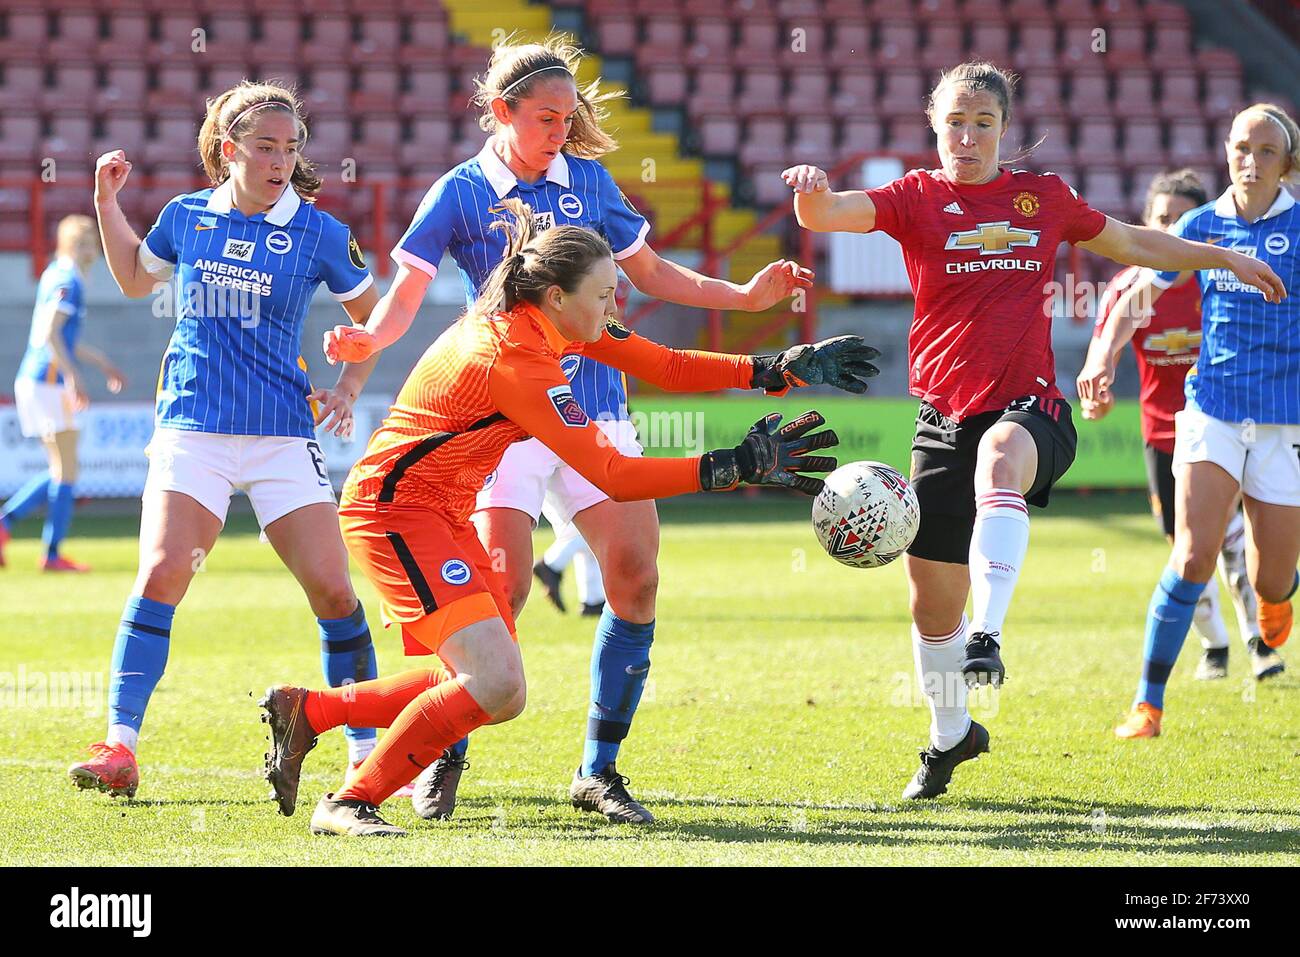 Crawley, UK. 4th Apr, 2021. Megan Walsh of Brighton and Hove Albion collects the ball ahead of Jane Ross of Manchester United during the FA Women's Super League match between Brighton & Hove Albion Women and Manchester United Women at The People's Pension Stadium on April 4th 2021 in Crawley, United Kingdom Credit: Paul Terry Photo/Alamy Live News Stock Photo